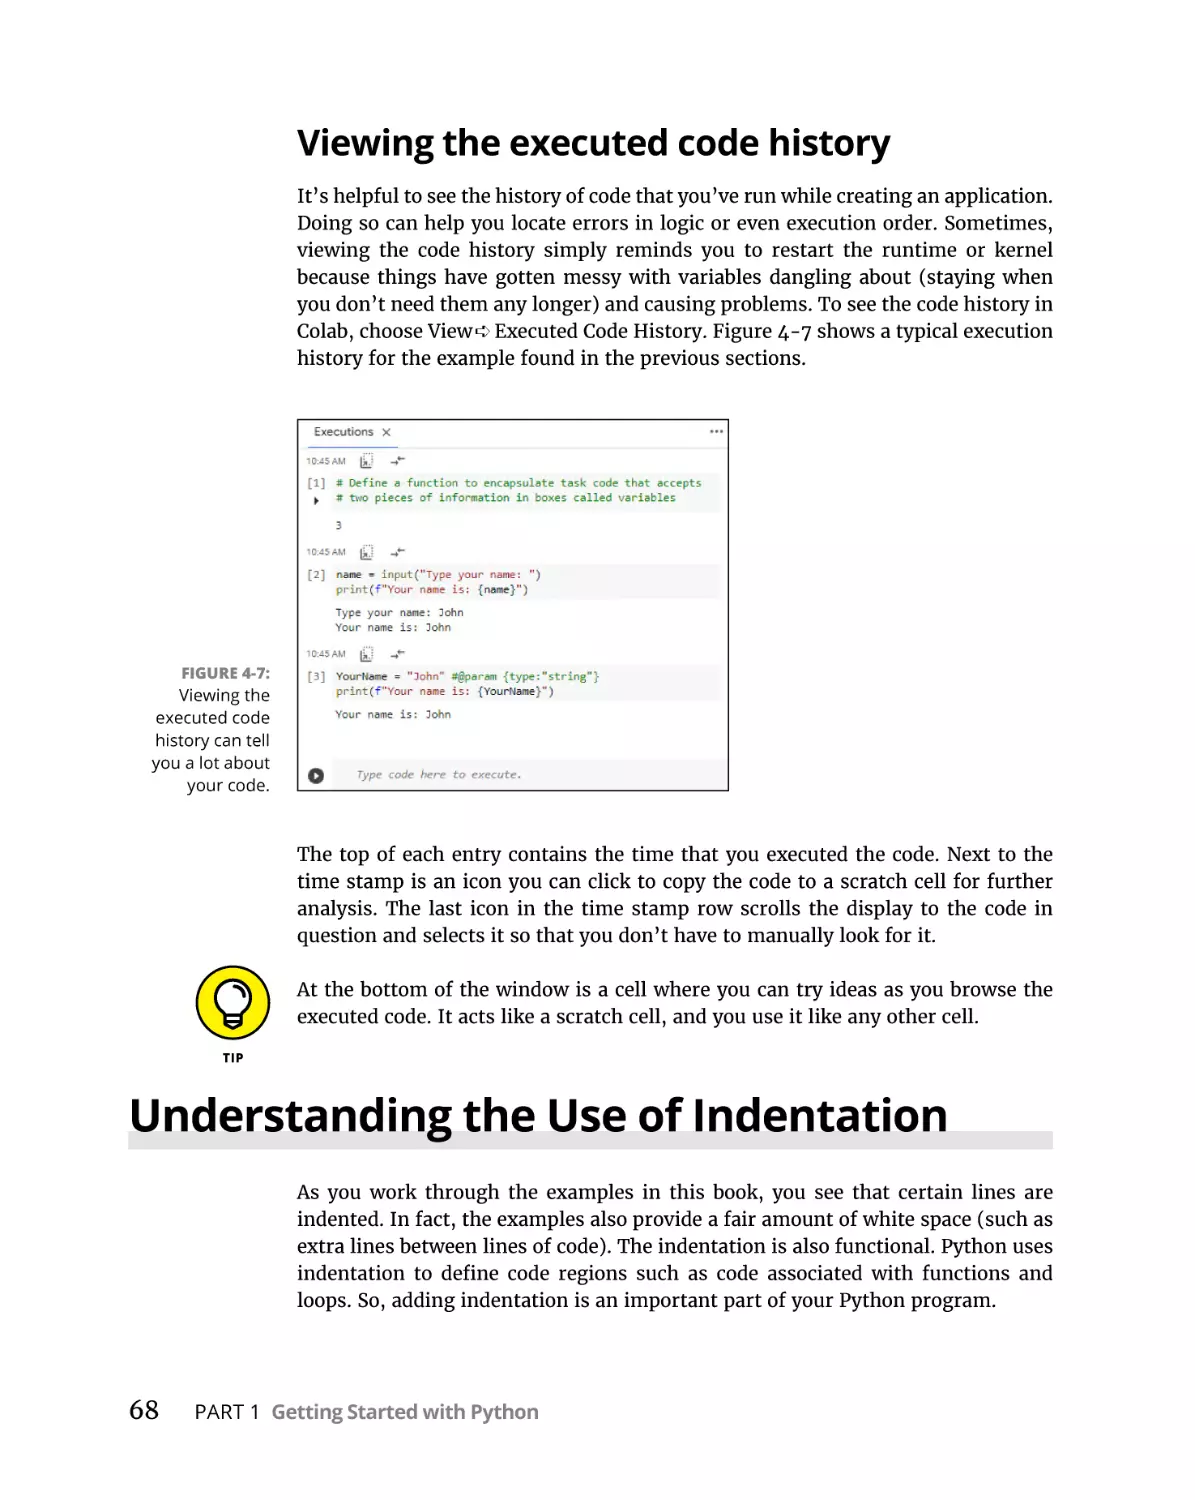 Viewing the executed code history
Understanding the Use of Indentation